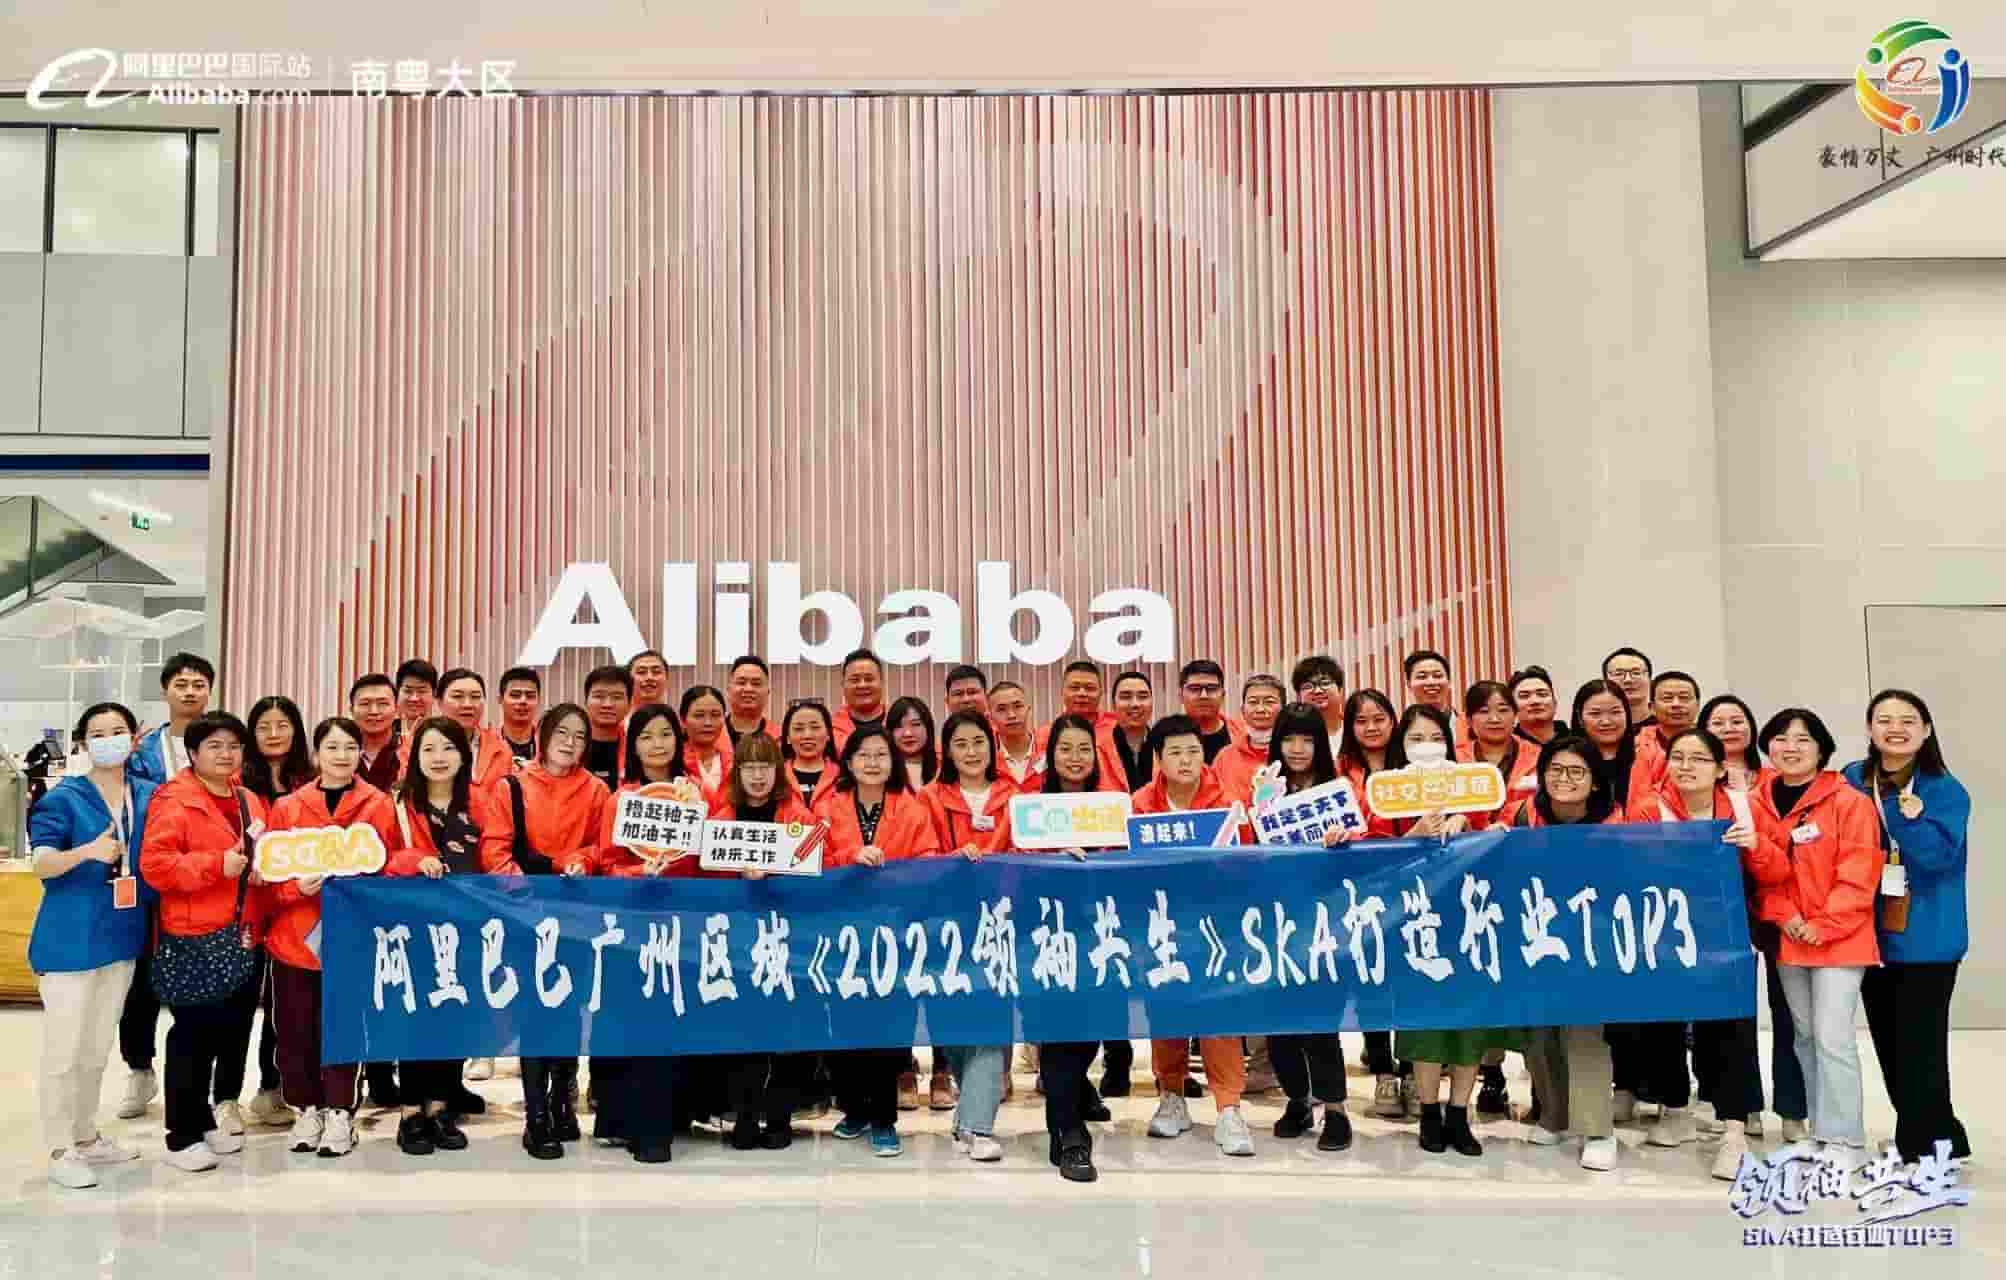 OTTO is TOP 3 Suppliers in alibaba